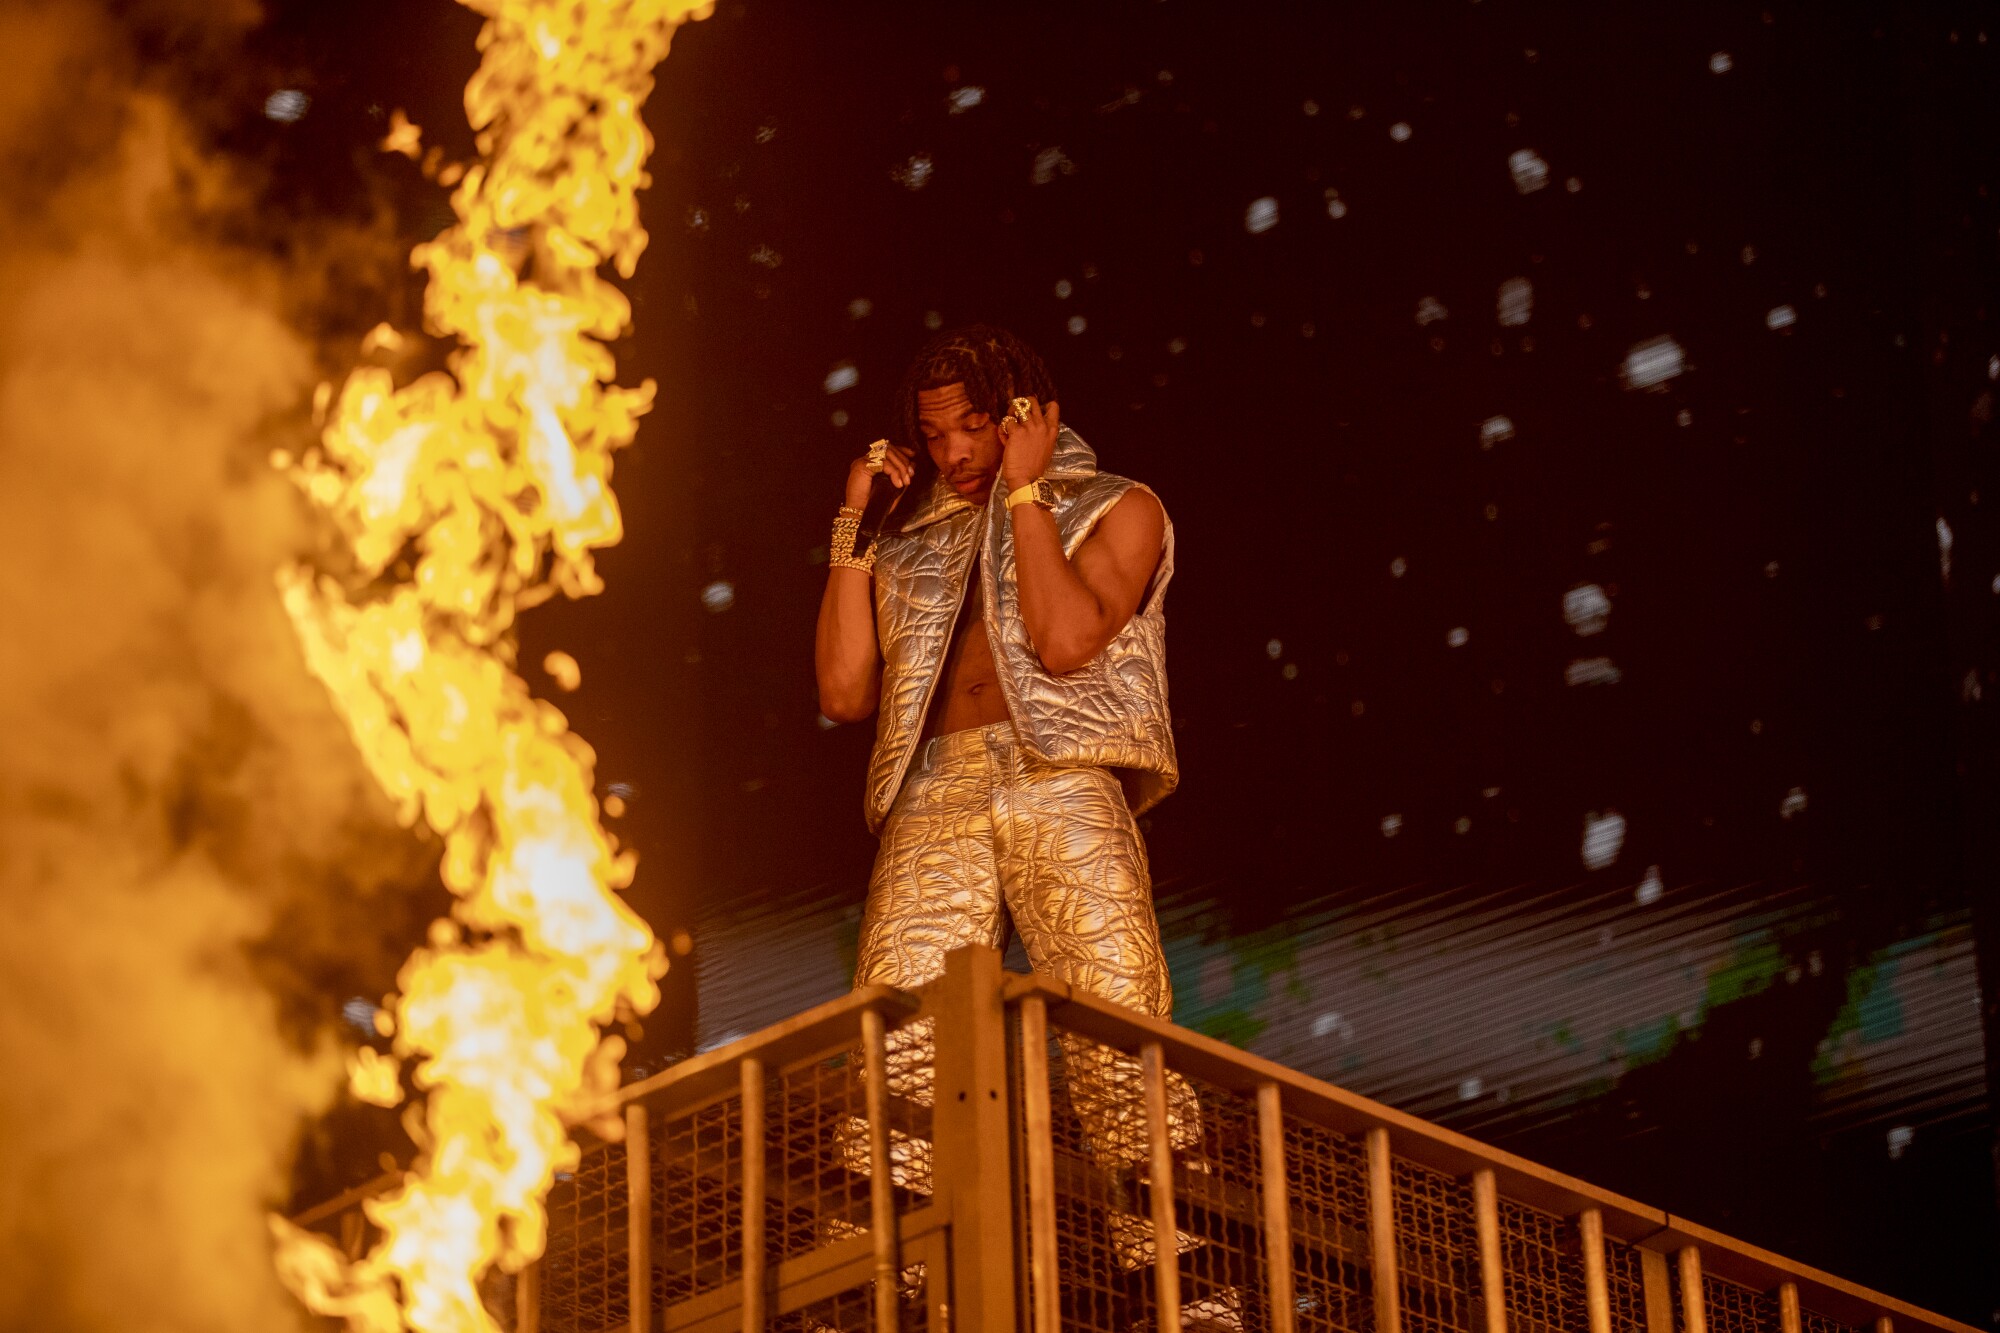 Lil Baby comes close to fire effects while performing at the Coachella festival.